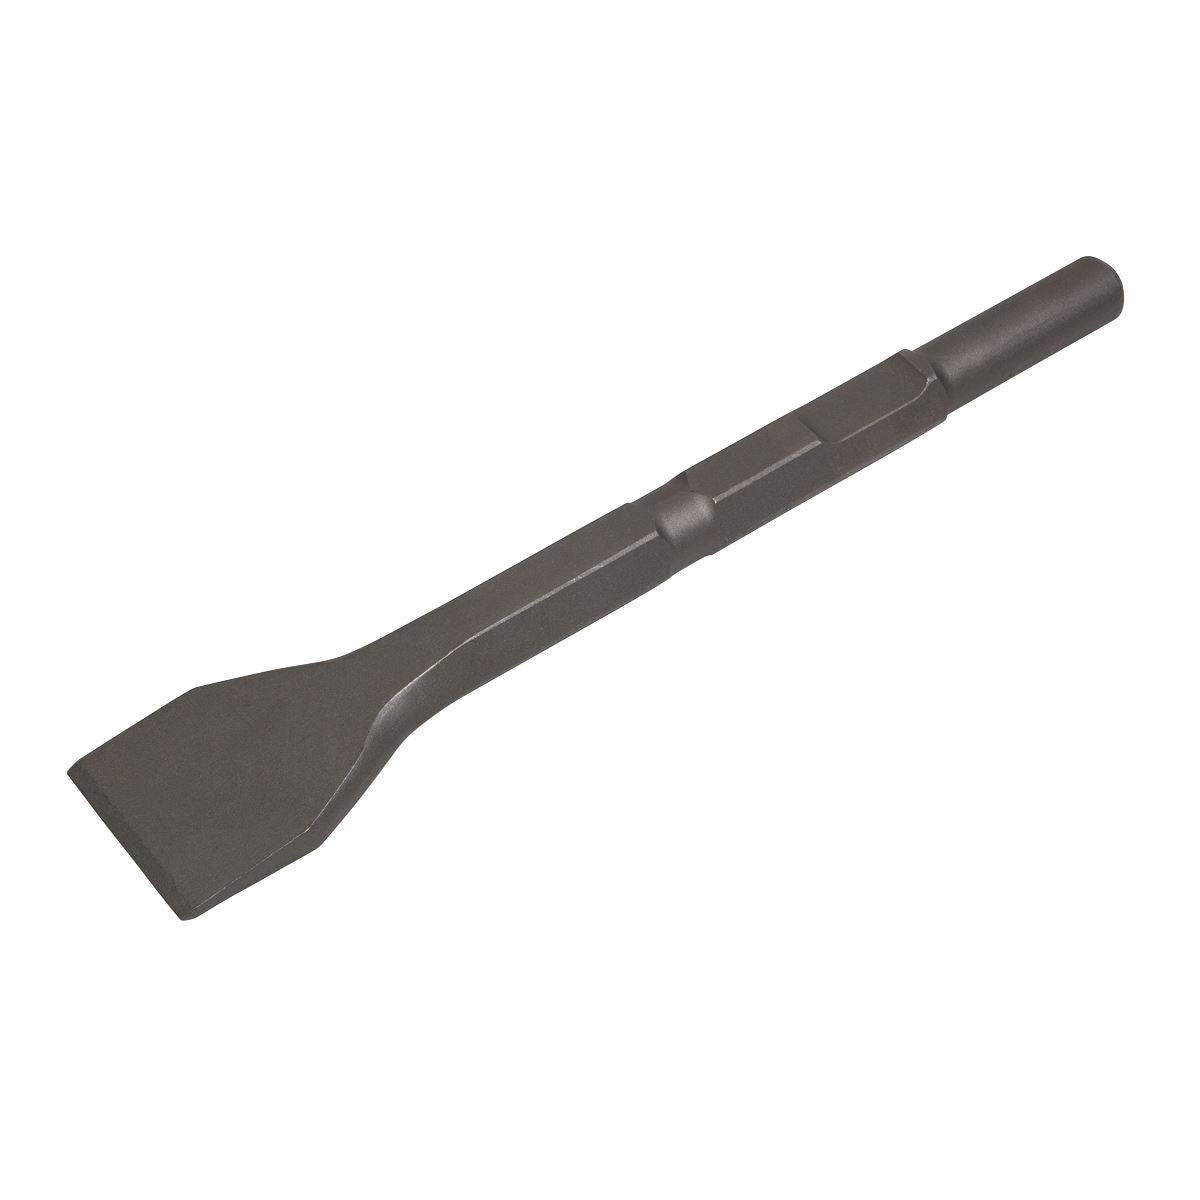 Worksafe by Sealey Wide Chisel 50 x 300mm - Kango 900